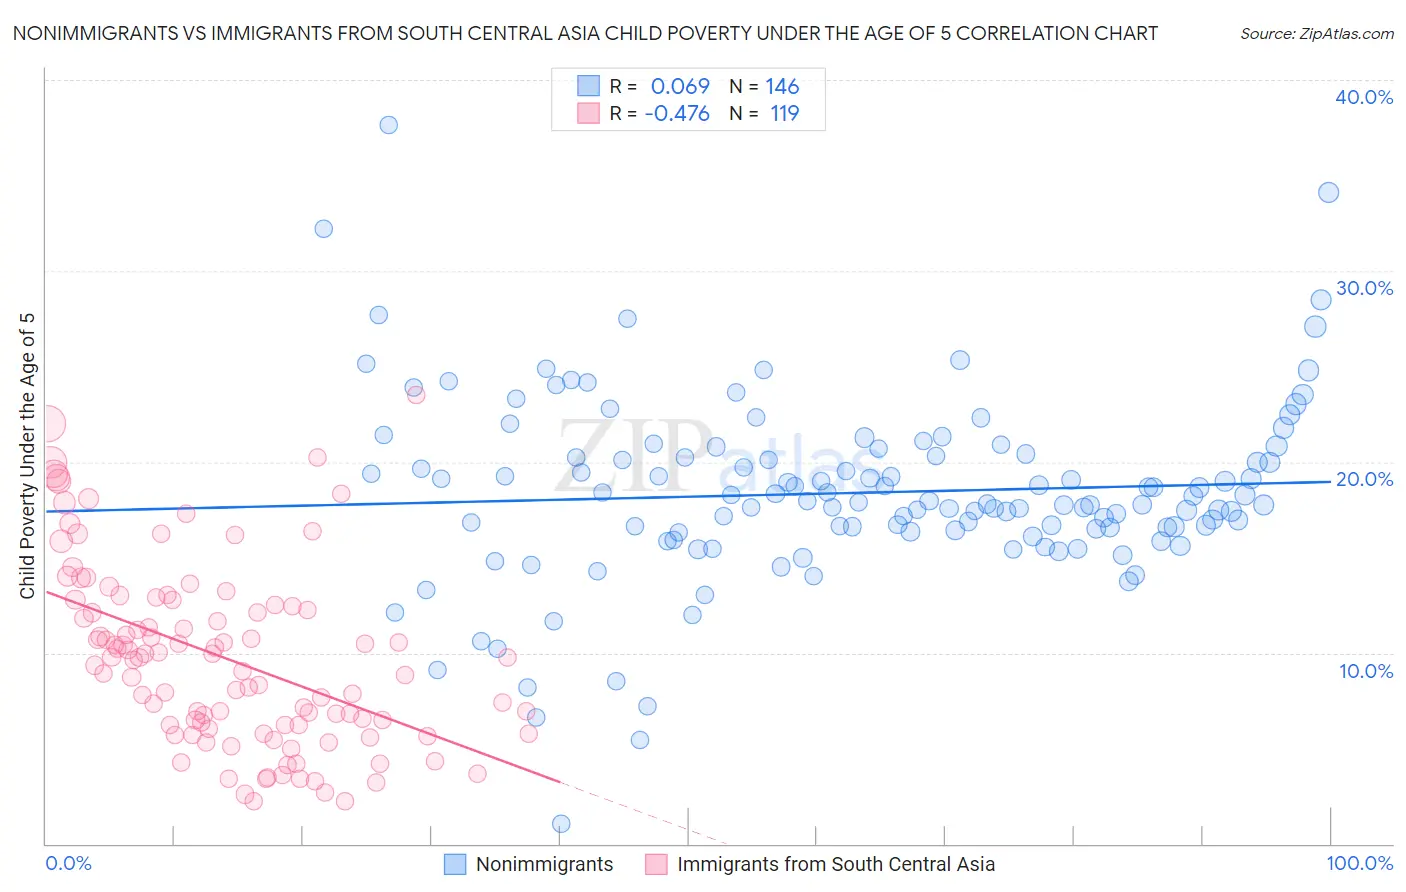 Nonimmigrants vs Immigrants from South Central Asia Child Poverty Under the Age of 5